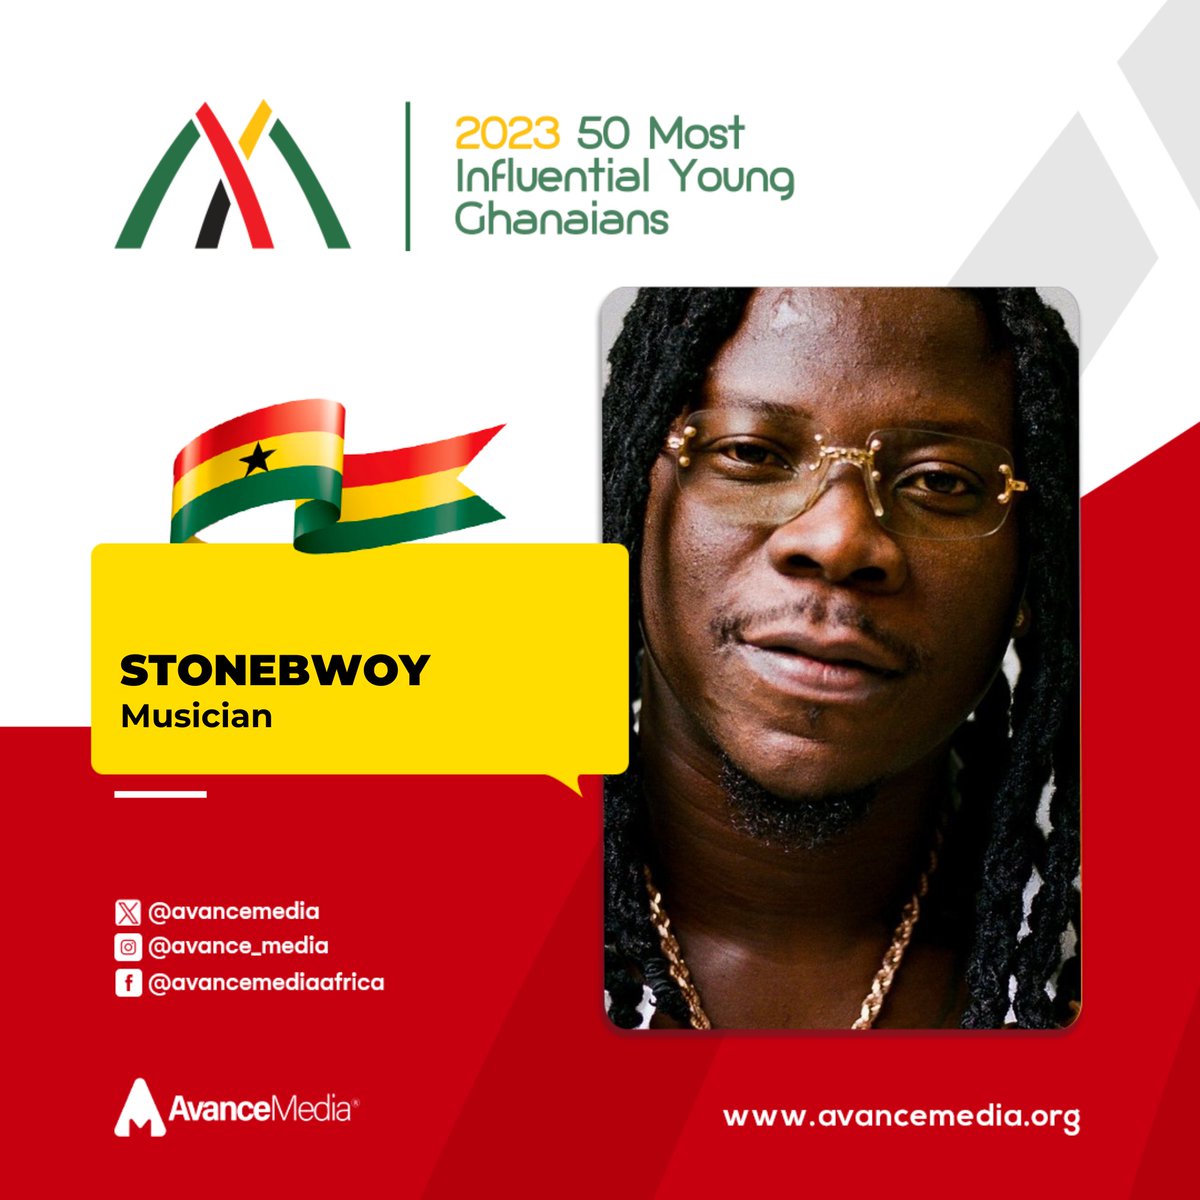 Stonebwoy makes the list of 50 Most Influential Young Ghanaian 2023 powered by @avancemedia.